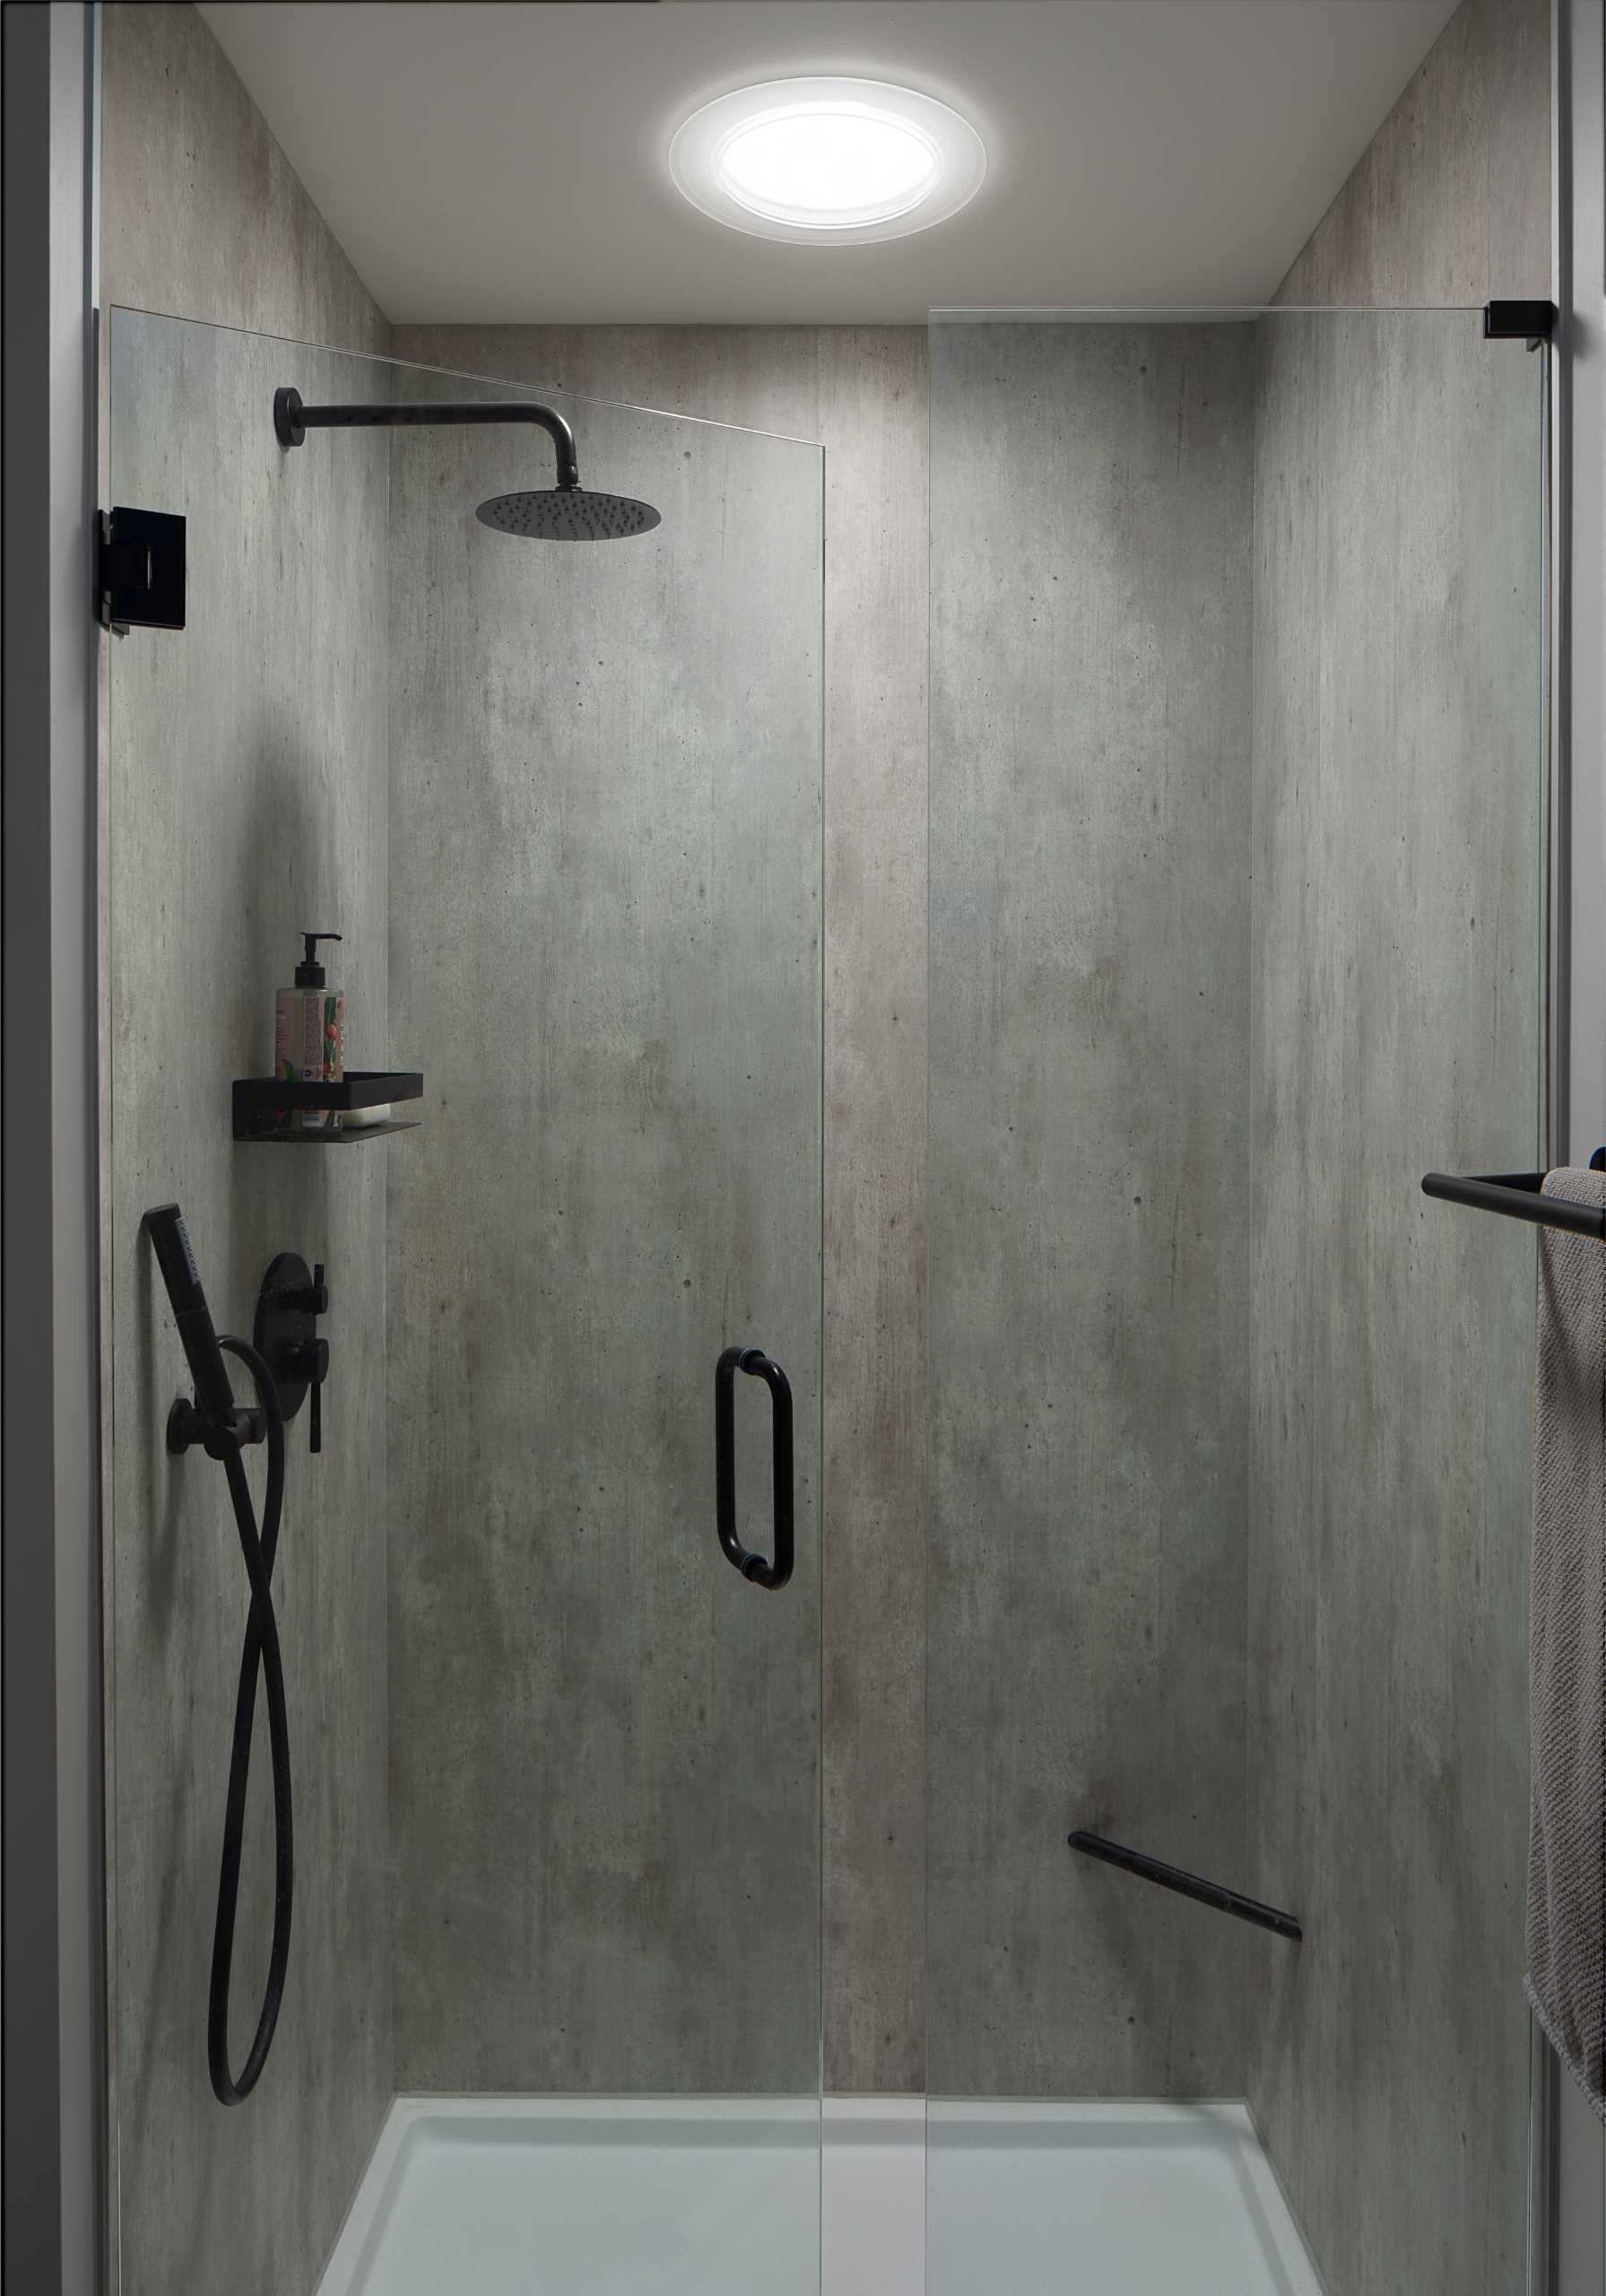 A modern grey shower with black accents.